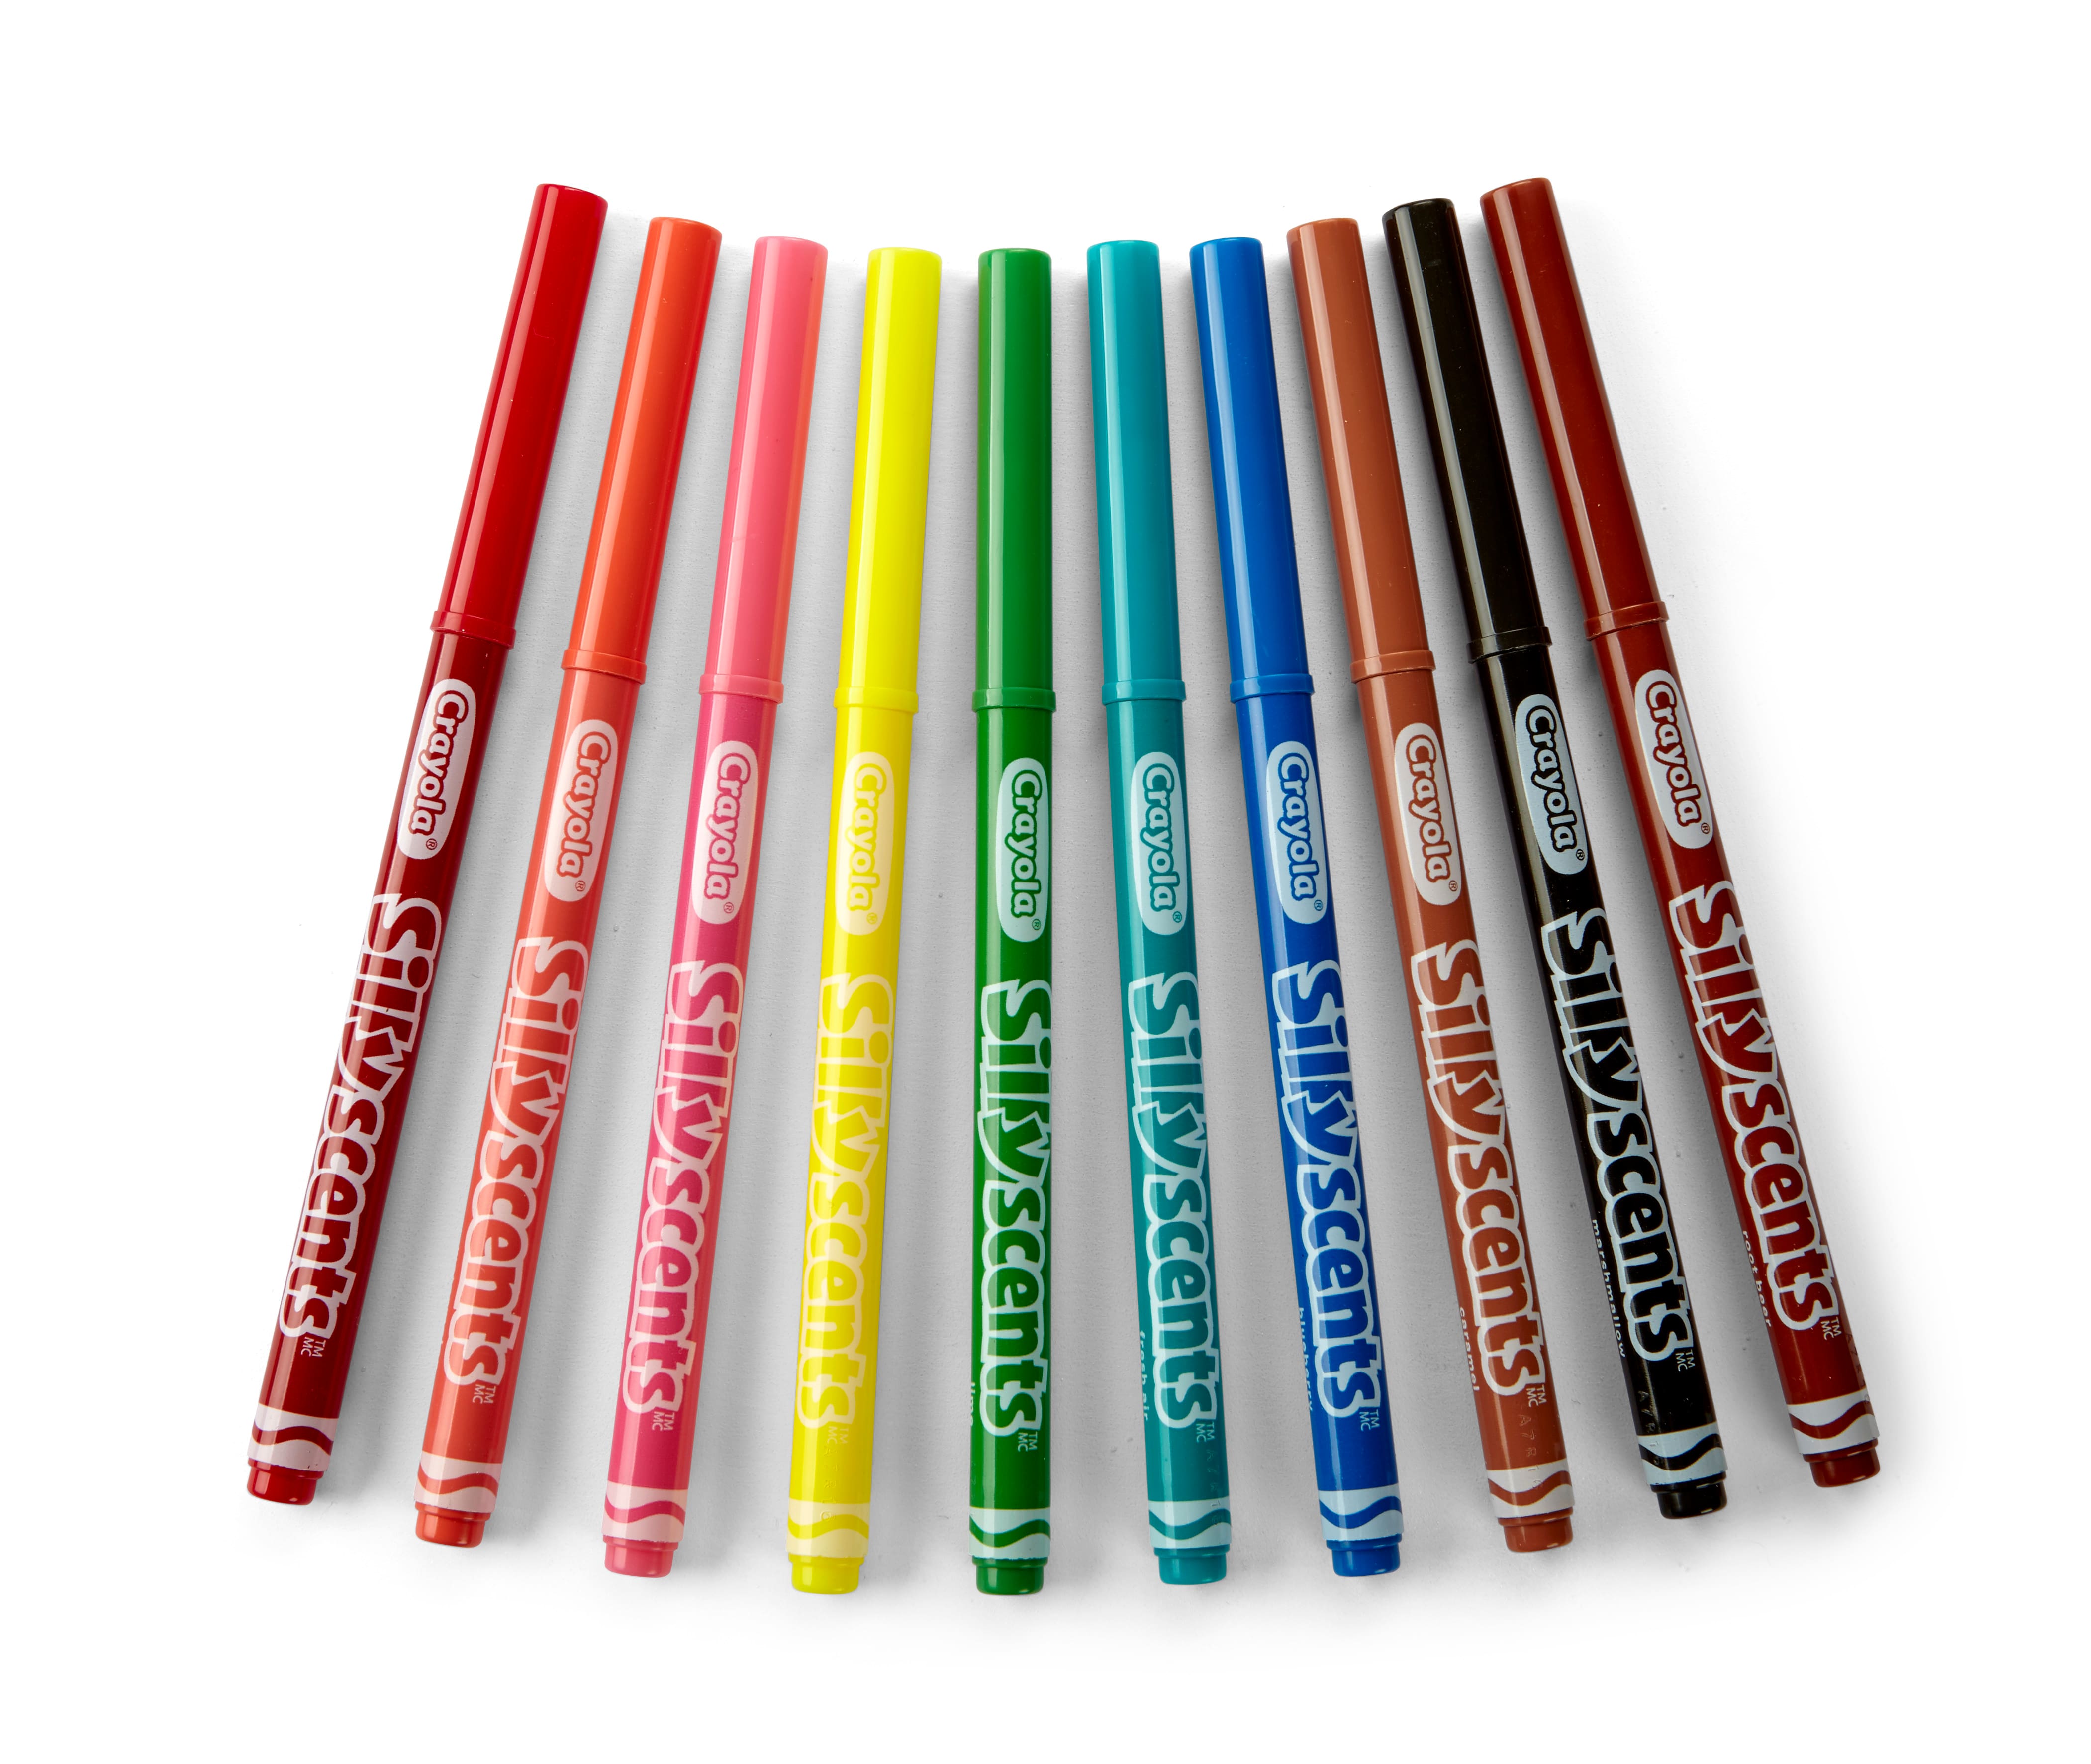 Crayola&#xAE; Silly Scents&#x2122; Slim Markers, 10ct.